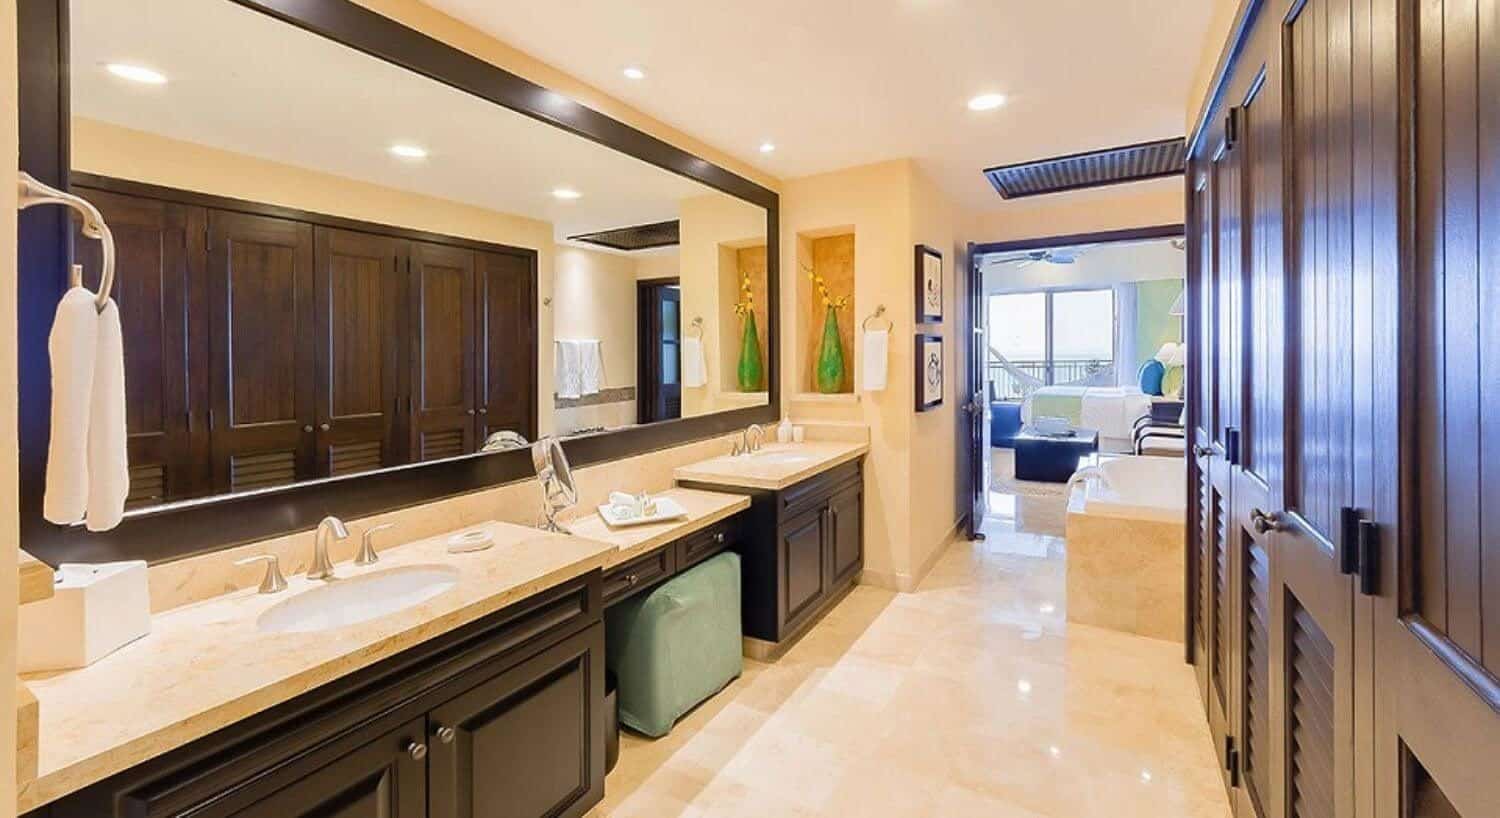 A spacious bathroom with double granite countertops and sinks, a vanity with a green ottoman in the middle, and jetted tub, with a bedroom with a loveseat, bed, and sliding doors leading out to a balcony with hammock.